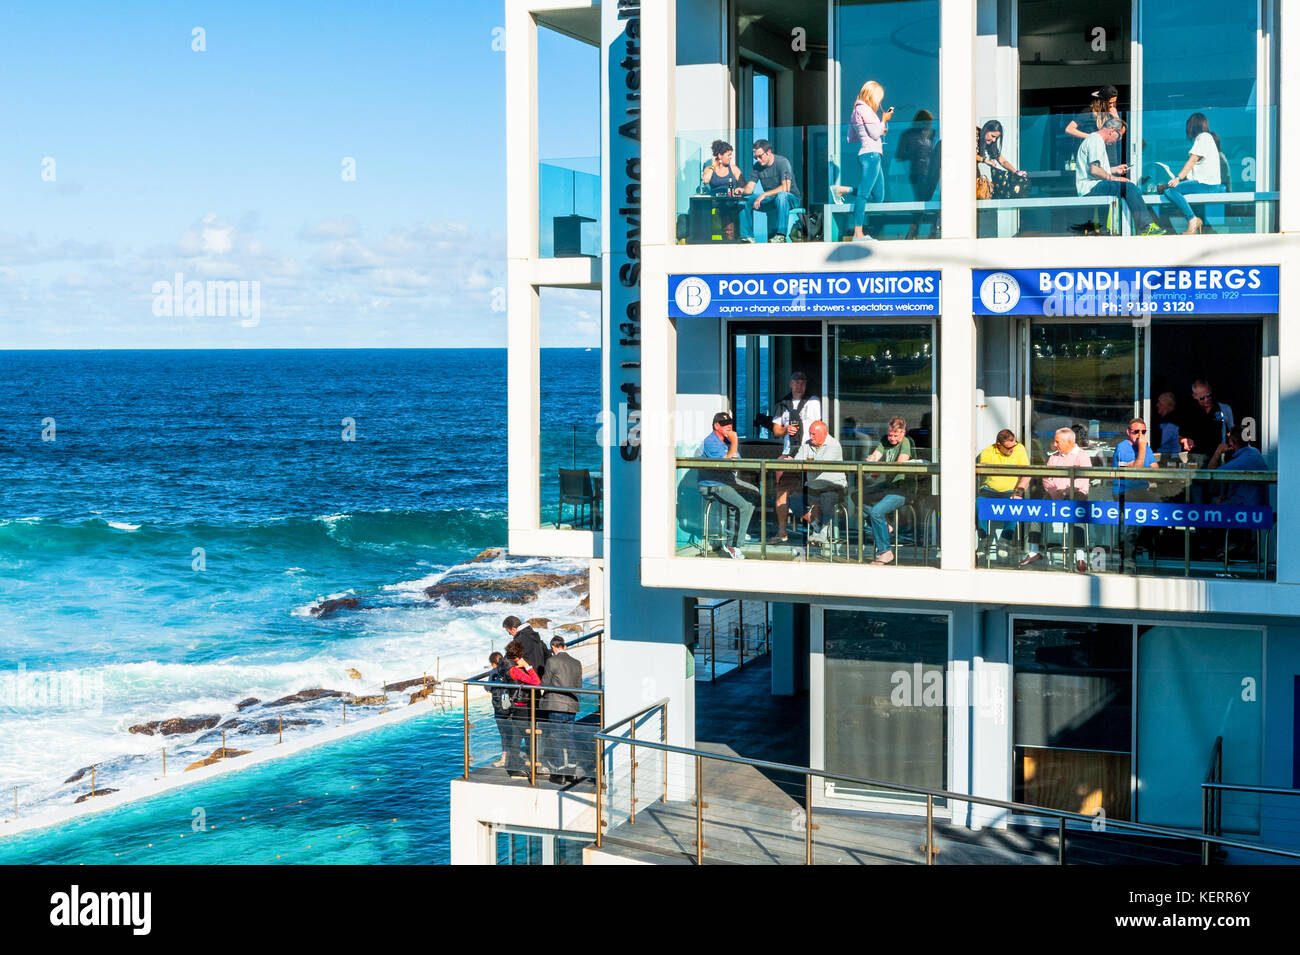 Diners enjoy the view from a beachside restaurant and bar  overlooking an outdoor pool along the beach walk from Bondi Beach to Coogee, Sydney Austral Stock Photo